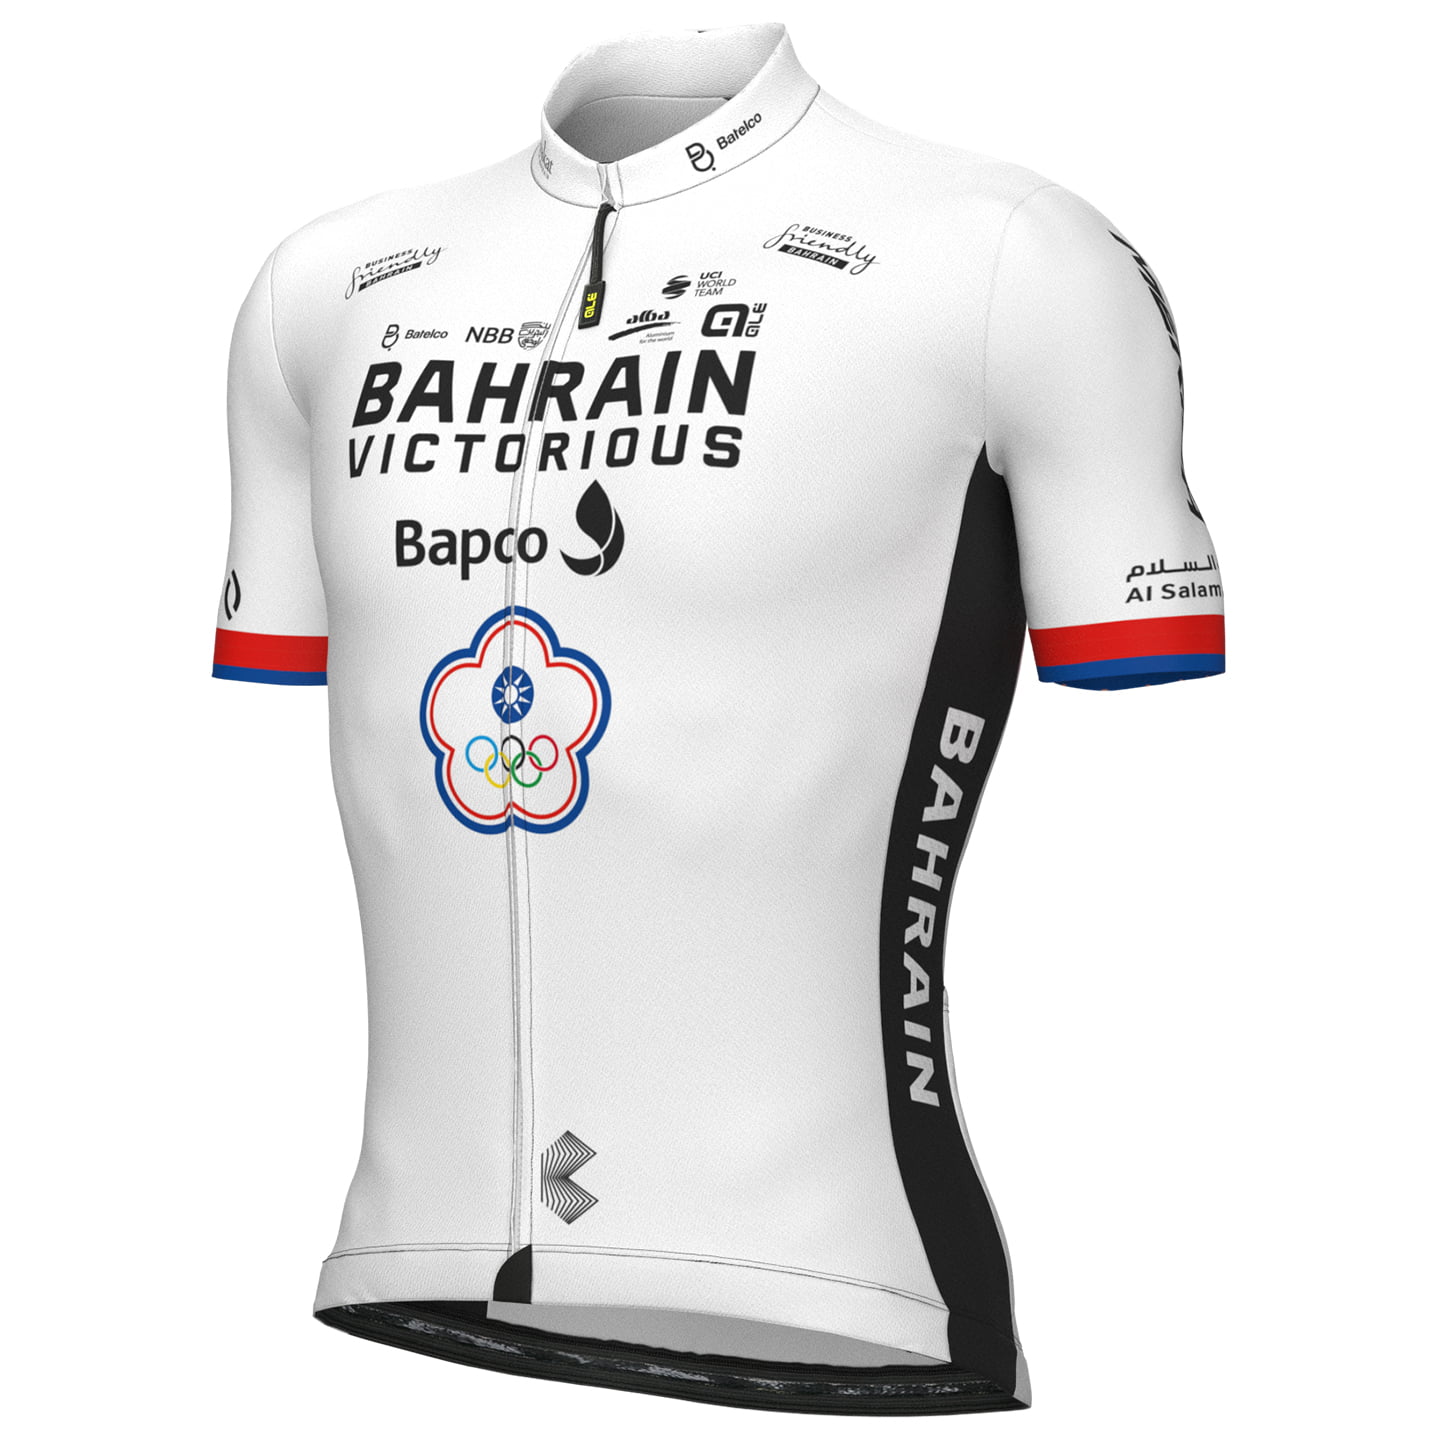 BAHRAIN - VICTORIOUS Short Sleeve Jersey Taiwanese Champion 2022, for men, size 2XL, Cycle shirt, Bike gear